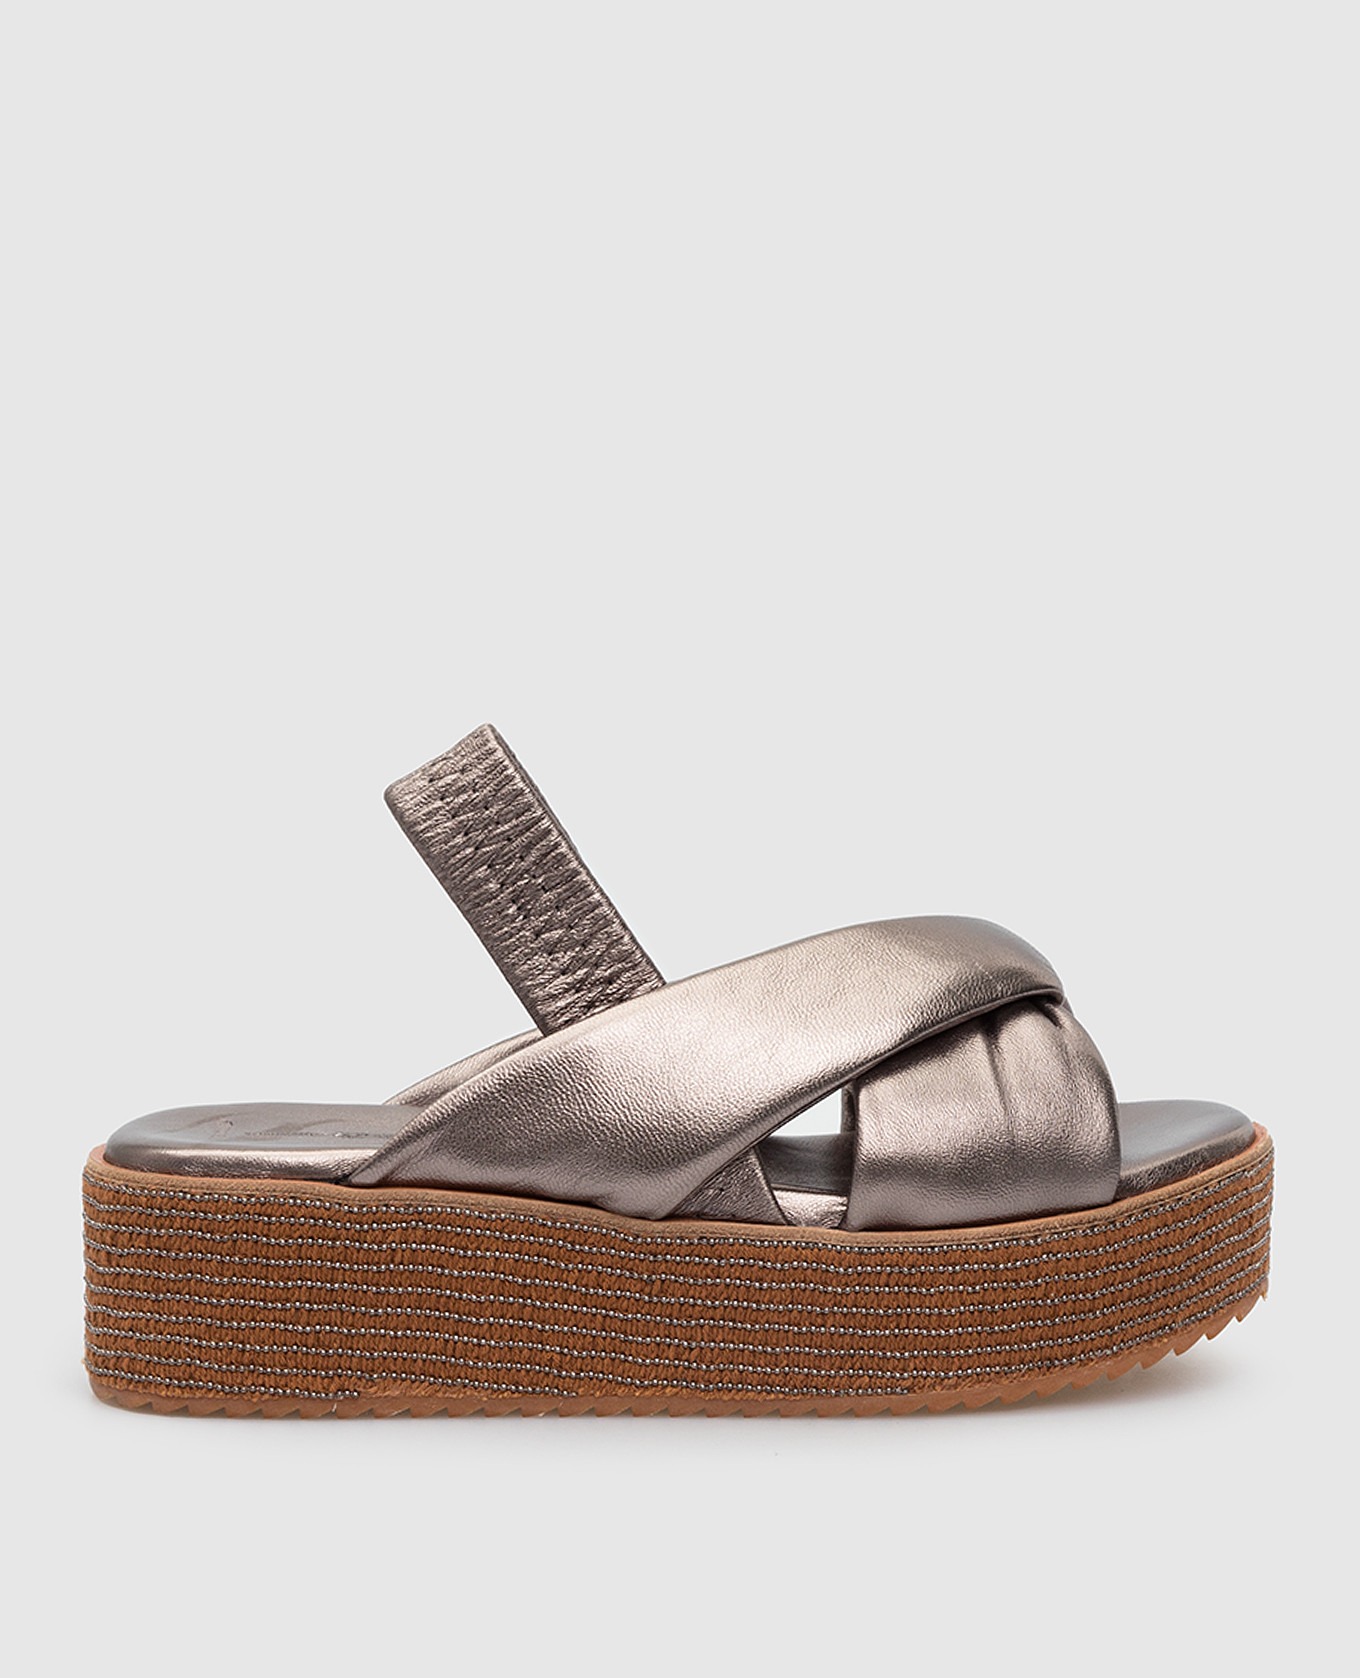 Steel leather sandals with bulky soles with monili